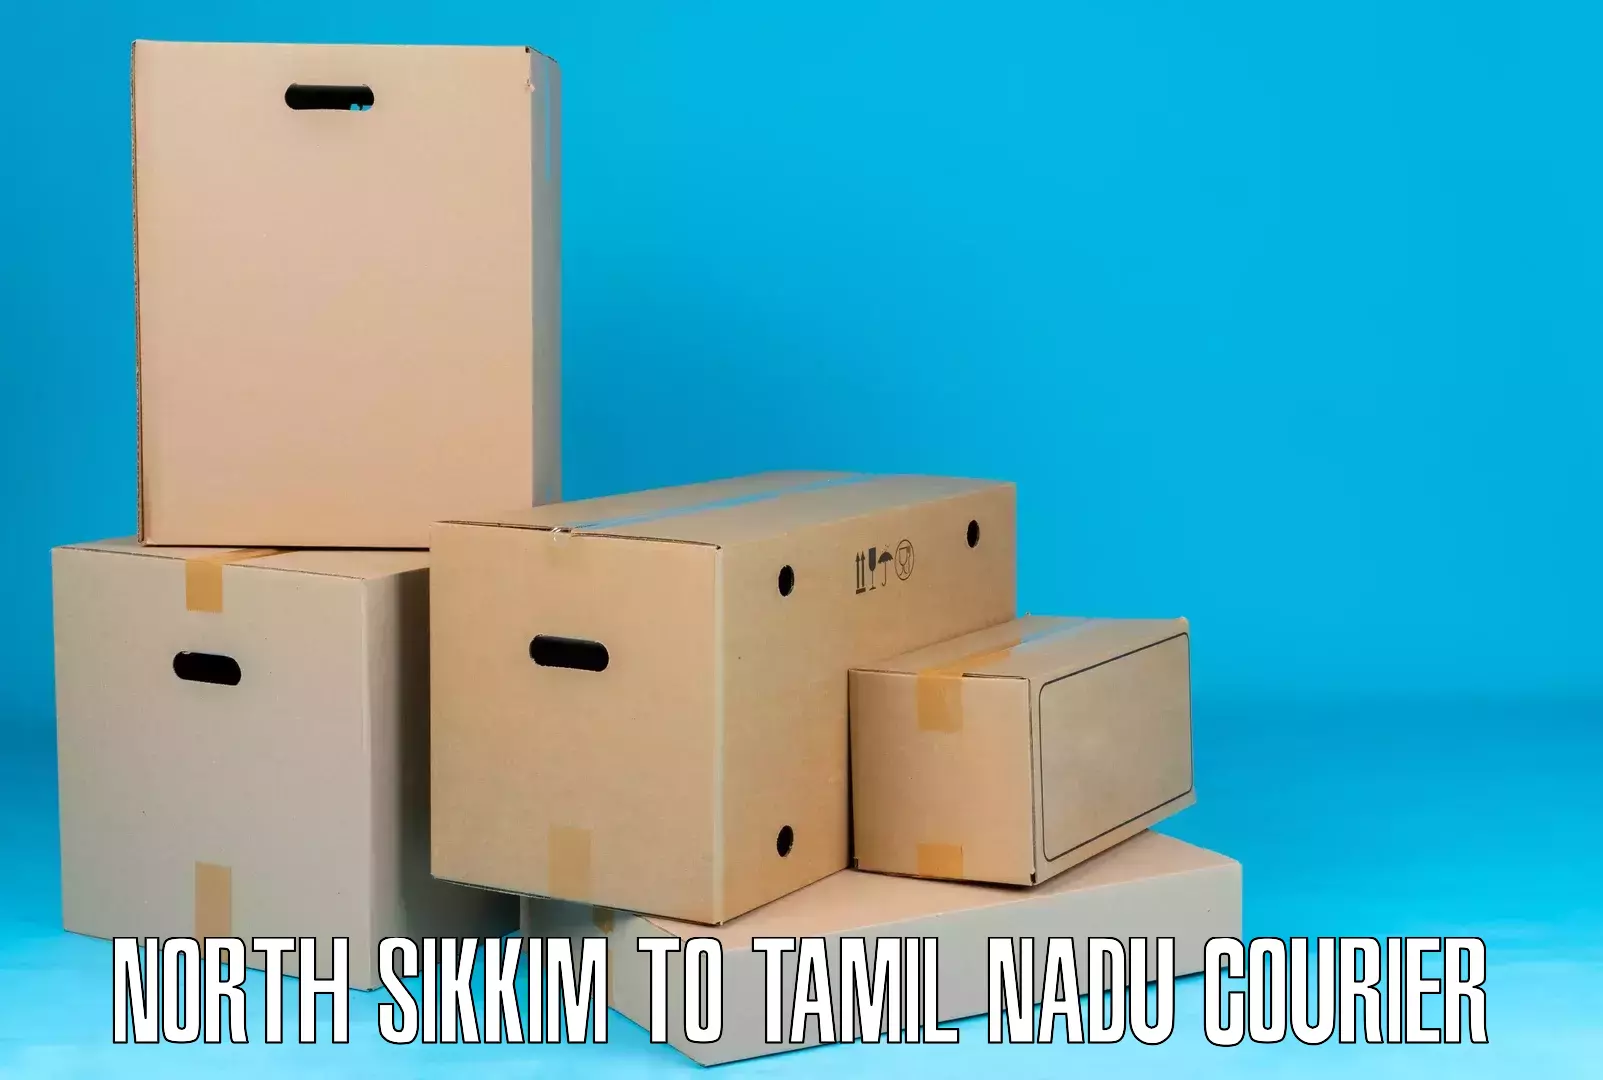 Reliable courier service North Sikkim to Ennore Port Chennai